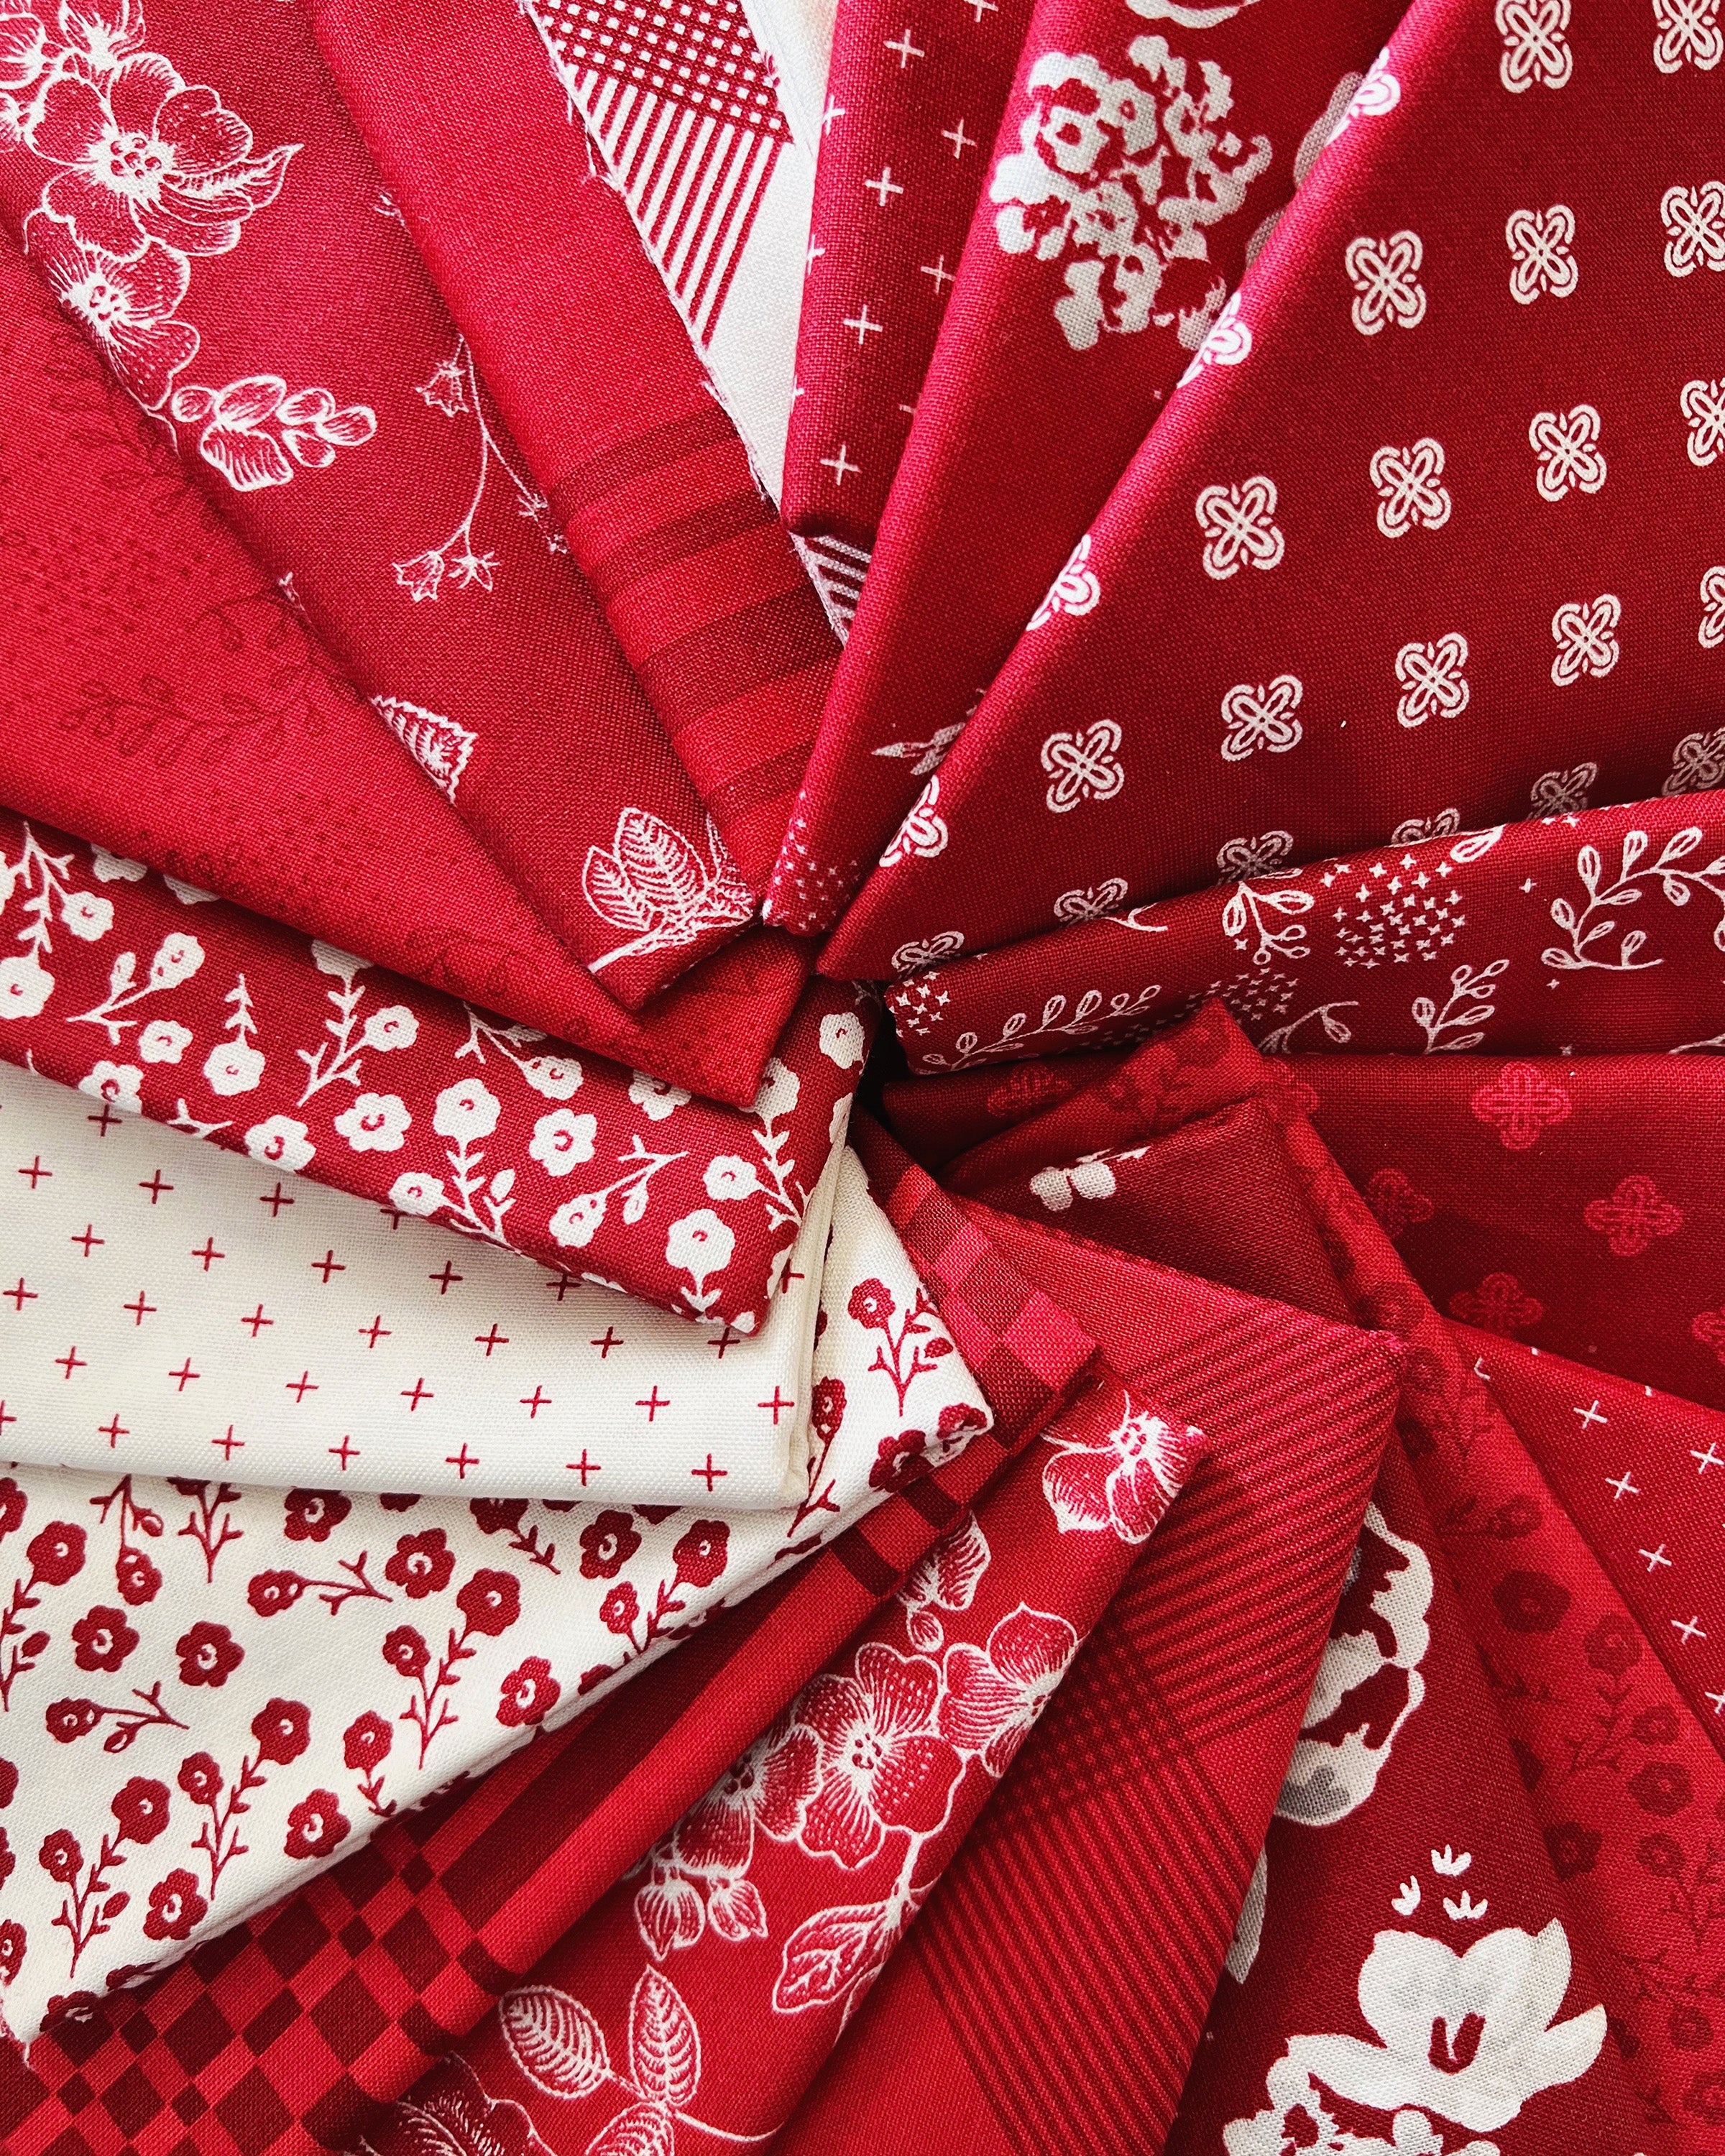 Heirloom Red fabric collection by My Mind's Eye for Riley Blake Designs